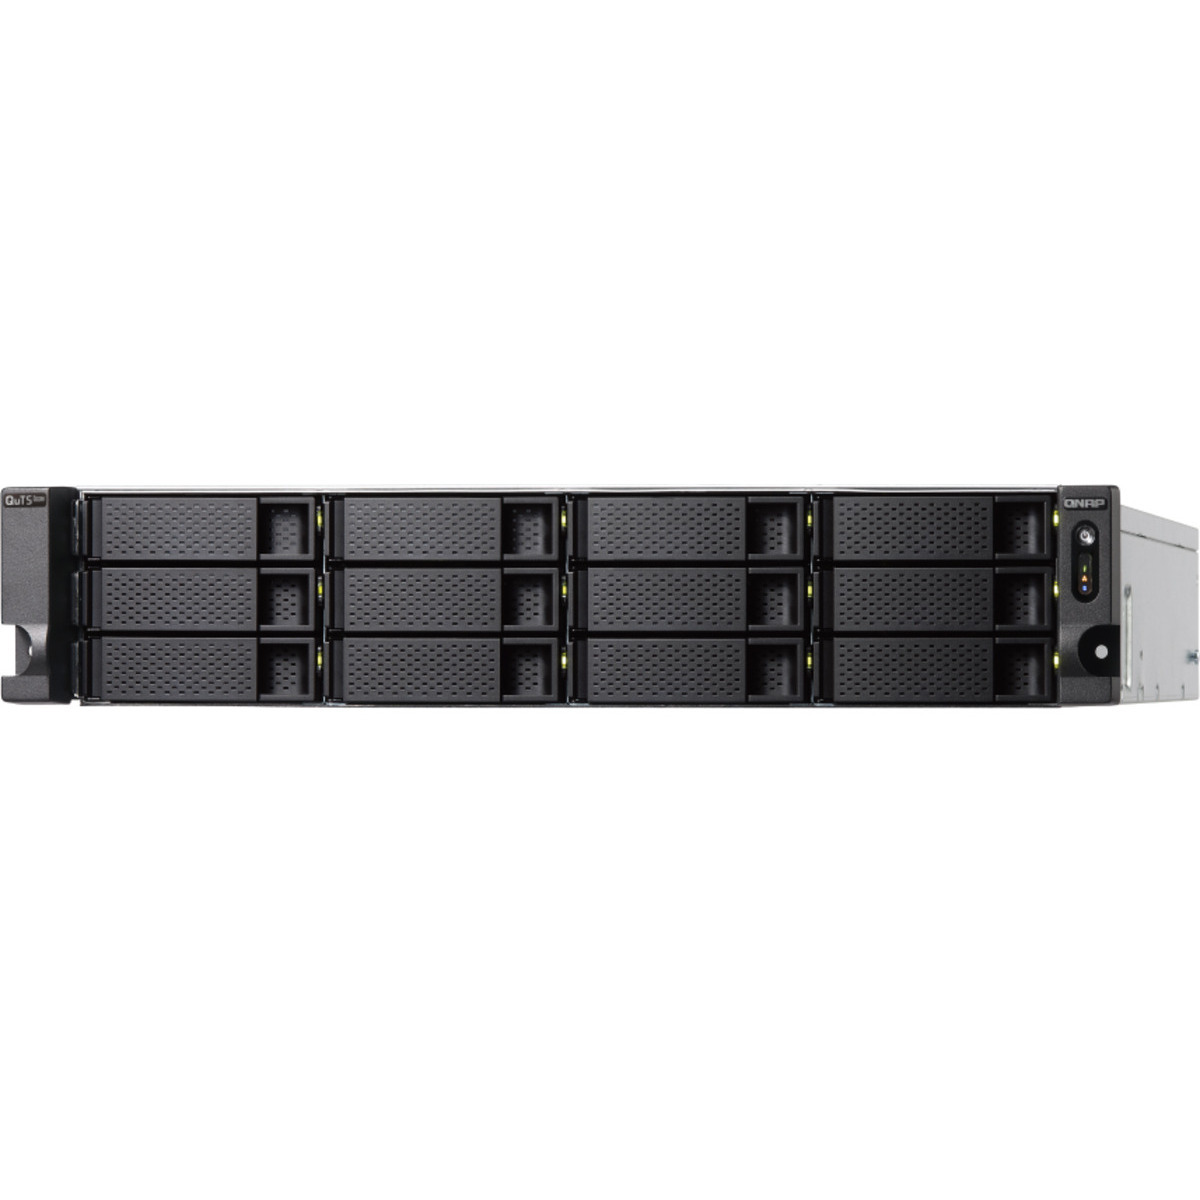 QNAP TS-h1886XU-RP R2 QuTS hero Edition 88tb 12+6-Bay RackMount Large Business / Enterprise NAS - Network Attached Storage Device 11x8tb Western Digital Red Pro WD8003FFBX 3.5 7200rpm SATA 6Gb/s HDD NAS Class Drives Installed - Burn-In Tested TS-h1886XU-RP R2 QuTS hero Edition